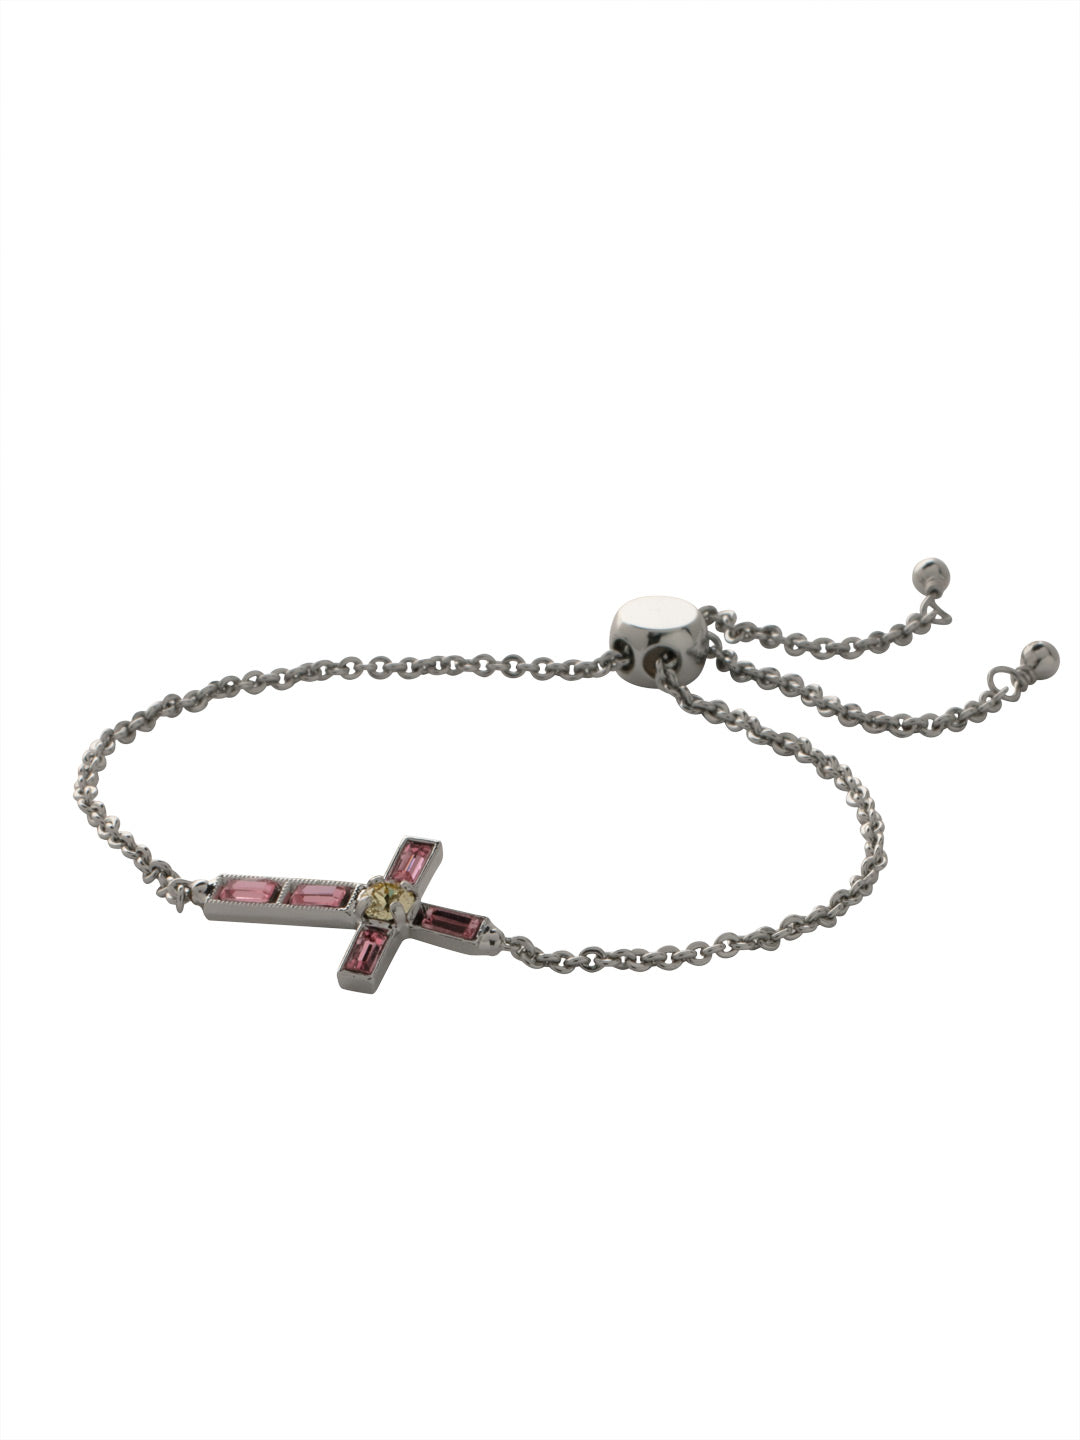 Tiffany Cross Slider Bracelet - BEX6PDPPN - <p>A timeless cross, embellished in assorted crystals, sits prominently on a delicate chain secured with a slider. From Sorrelli's Pink Pineapple collection in our Palladium finish.</p>